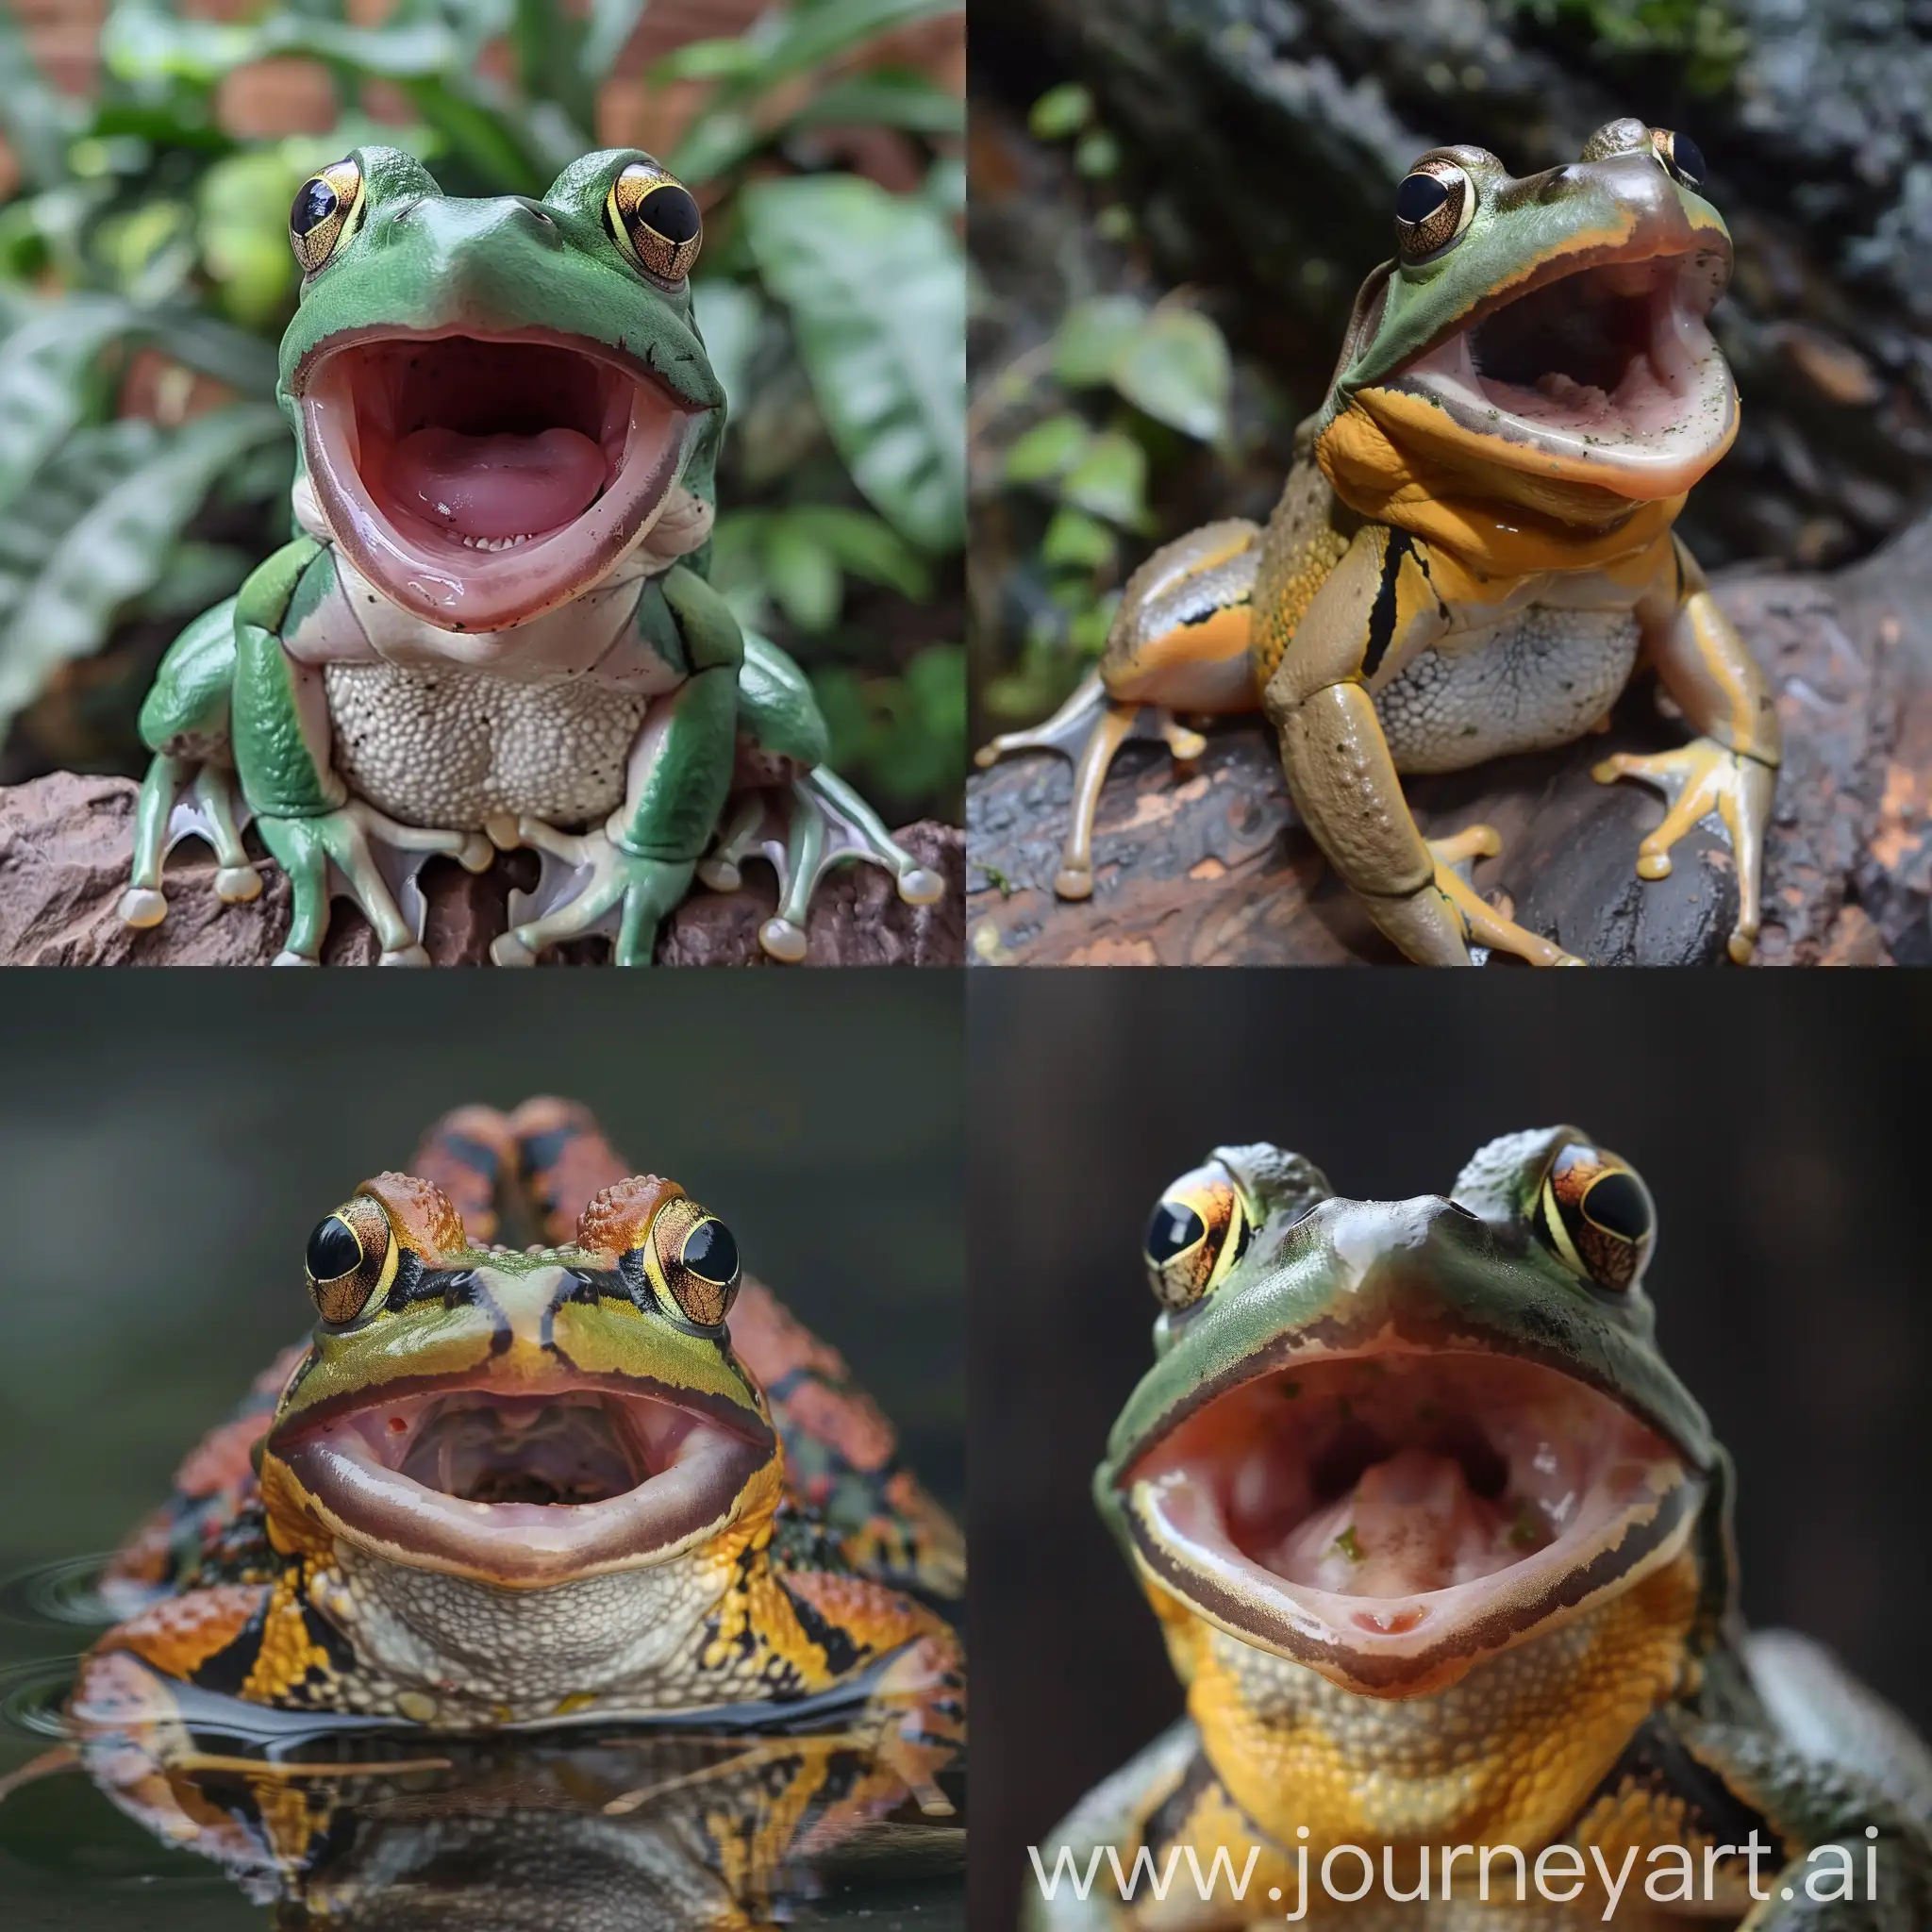 Playful-BigMouthed-Frog-in-Vibrant-Colors